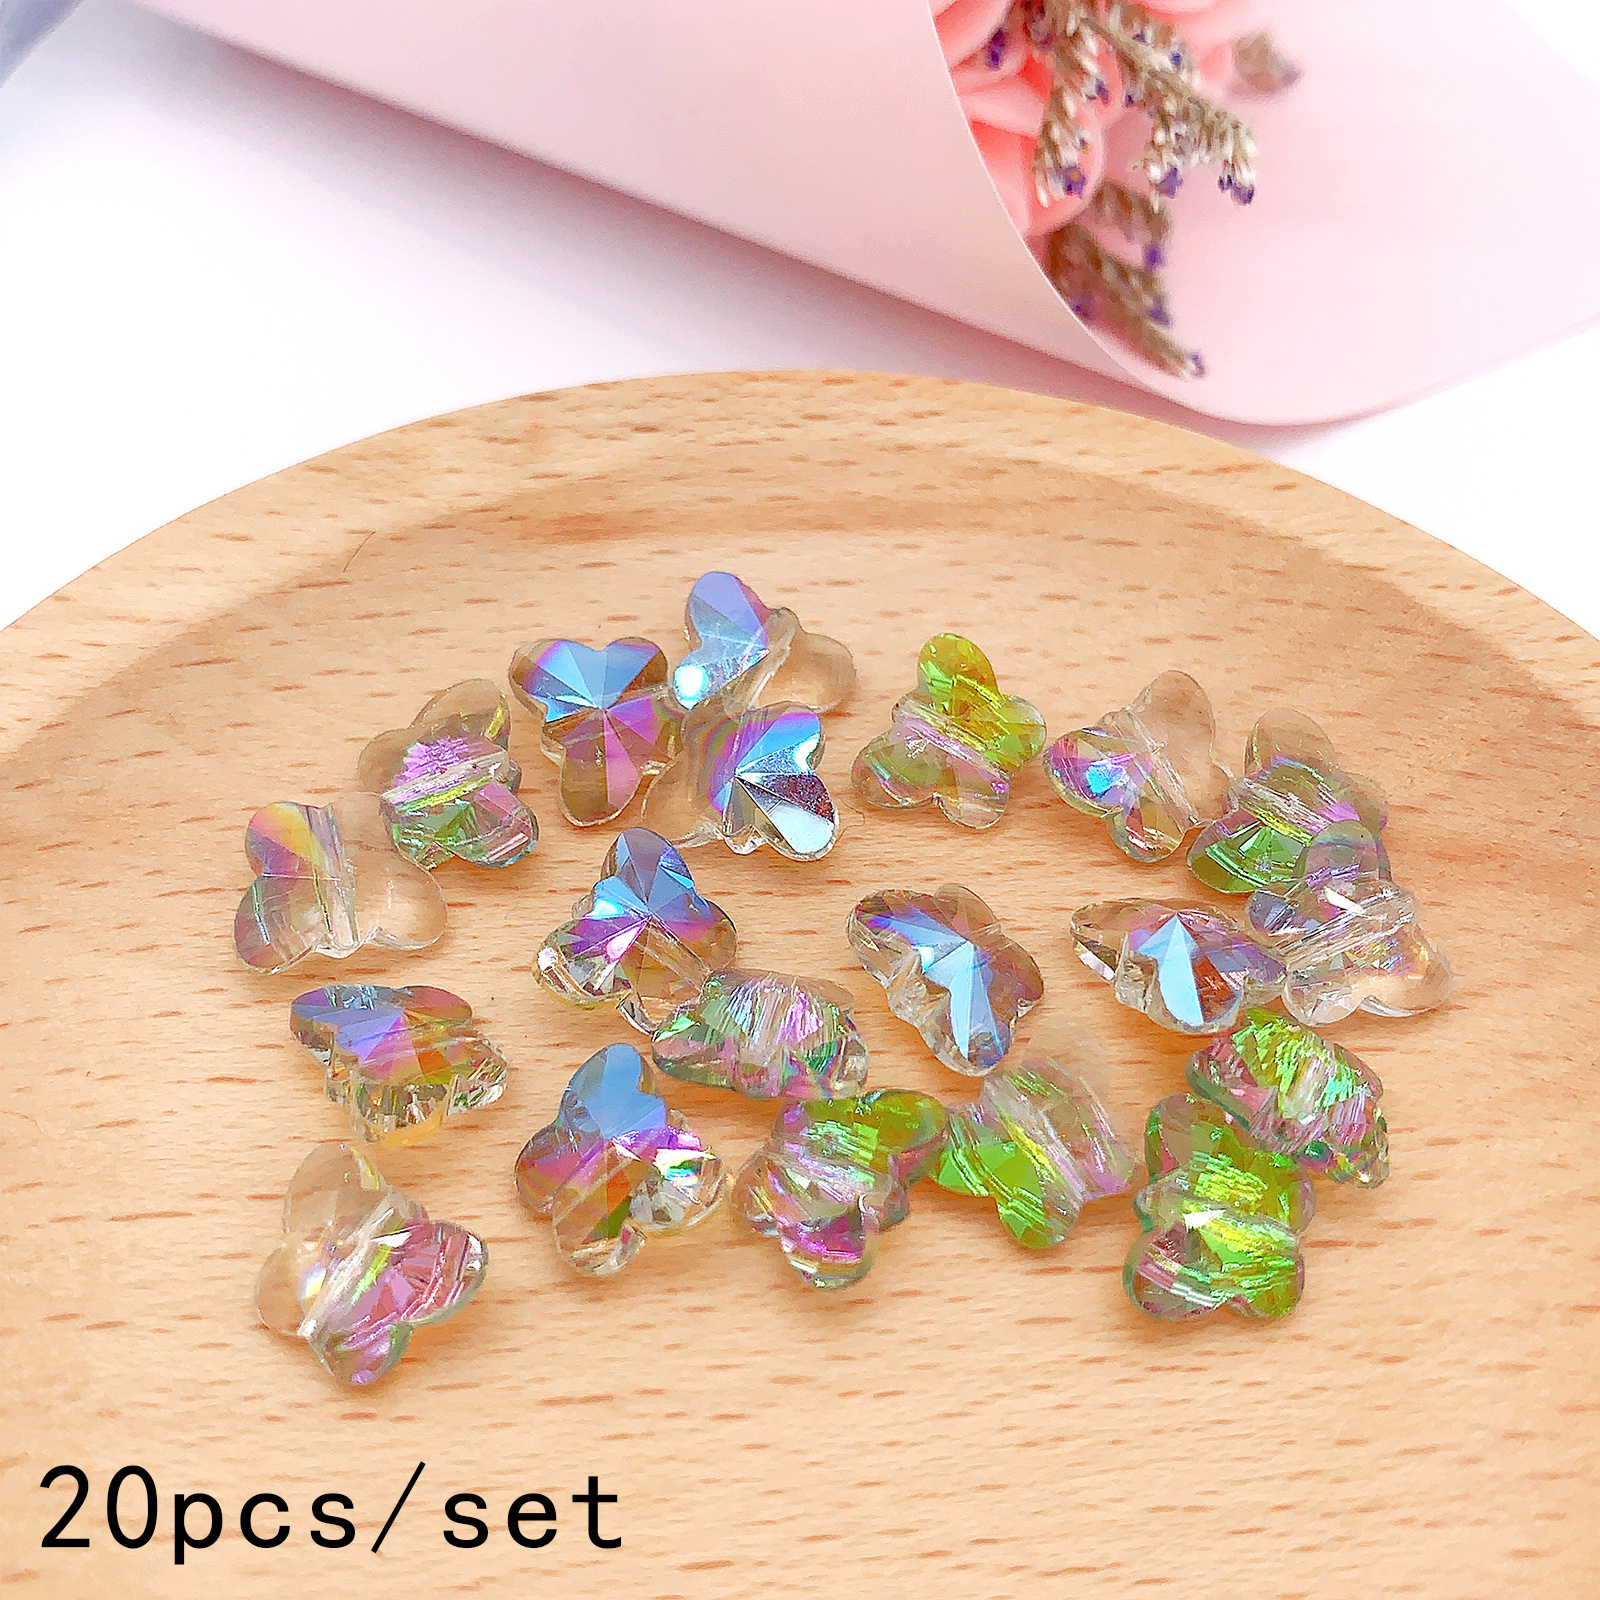 Lumanie 100pcs Crystal Butterfly Beads, 14mm Butterfly Shape Crystal Glass Beads with 10 Mixed Colors for DIY Jewellery Making and CH